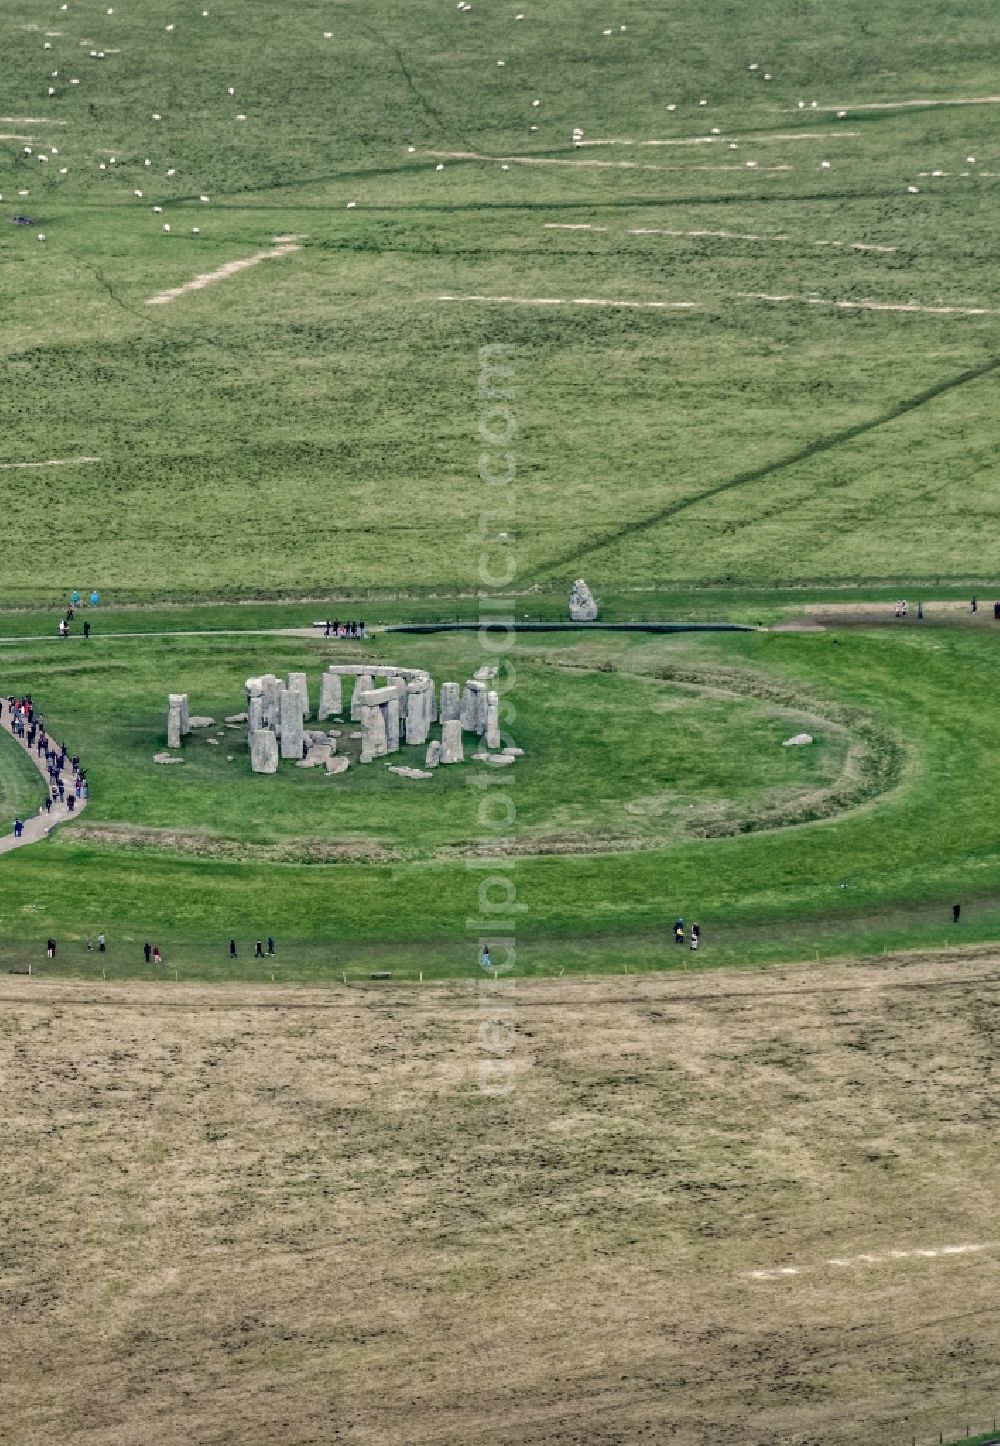 Aerial image Amesbury - Attraction and tourist attraction of the historical monument Stonehenge on a green grass field in Amesbury in UK United Kingdom. The building consists of a circular grave facility, which is surrounded by a Megalithstruktur formed of several concentric stone circles. It's origins are not known although it is thought to have evolved over a period of 1500 years. It was added to UNESCO's list of World Heritage Sites and is a legally protected Scheduled Ancient Monument